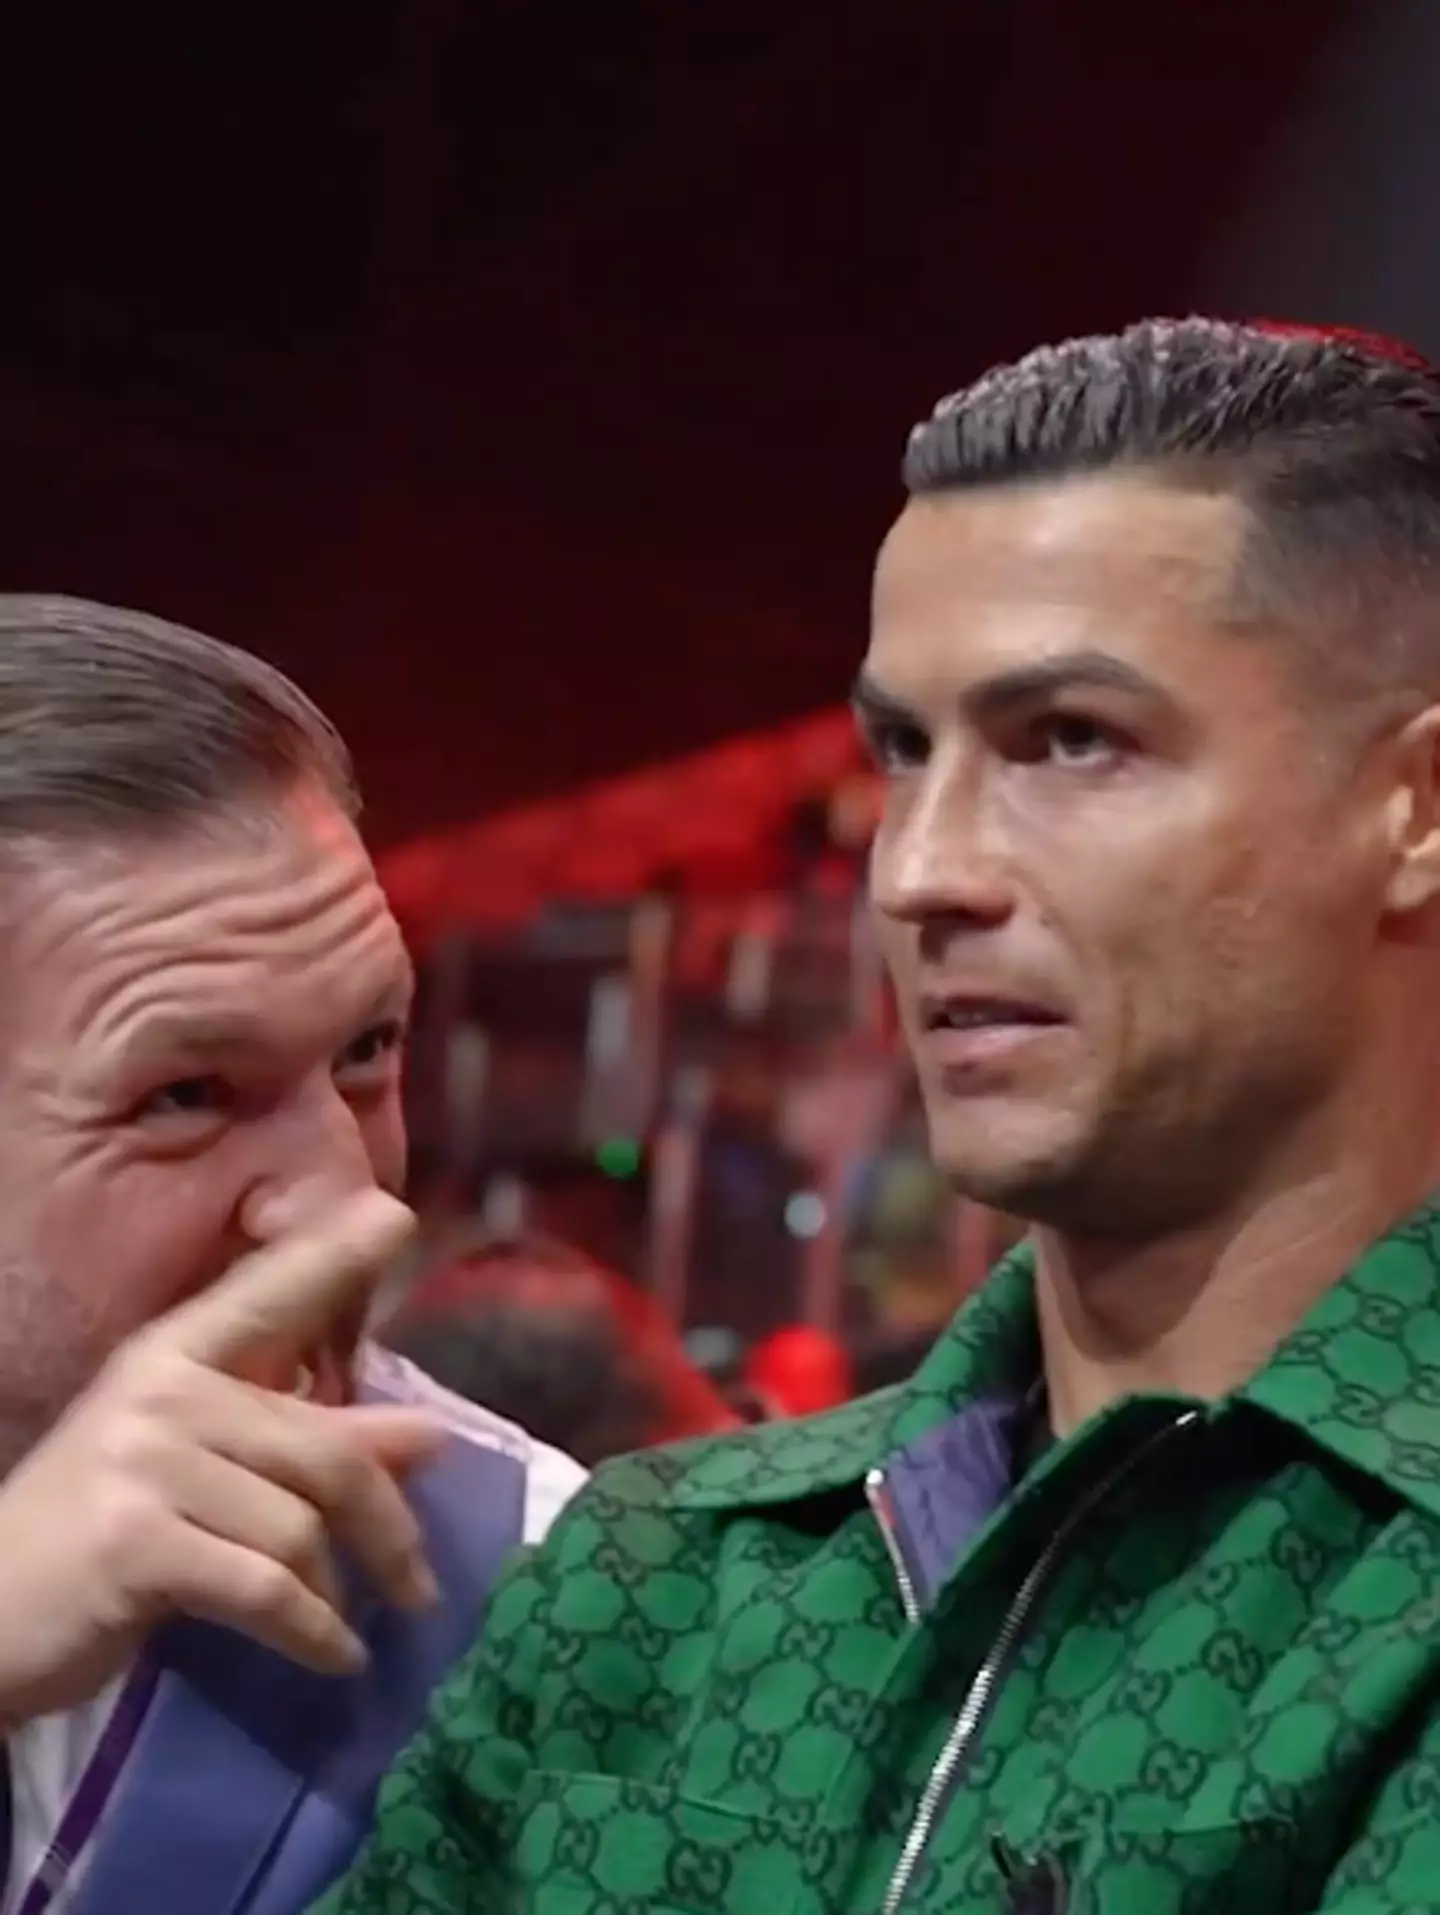 Cristiano Ronaldo and Conor McGregor were ringside for Anthony Joshua and Deontay Wilder's fights in Saudi Arabia.